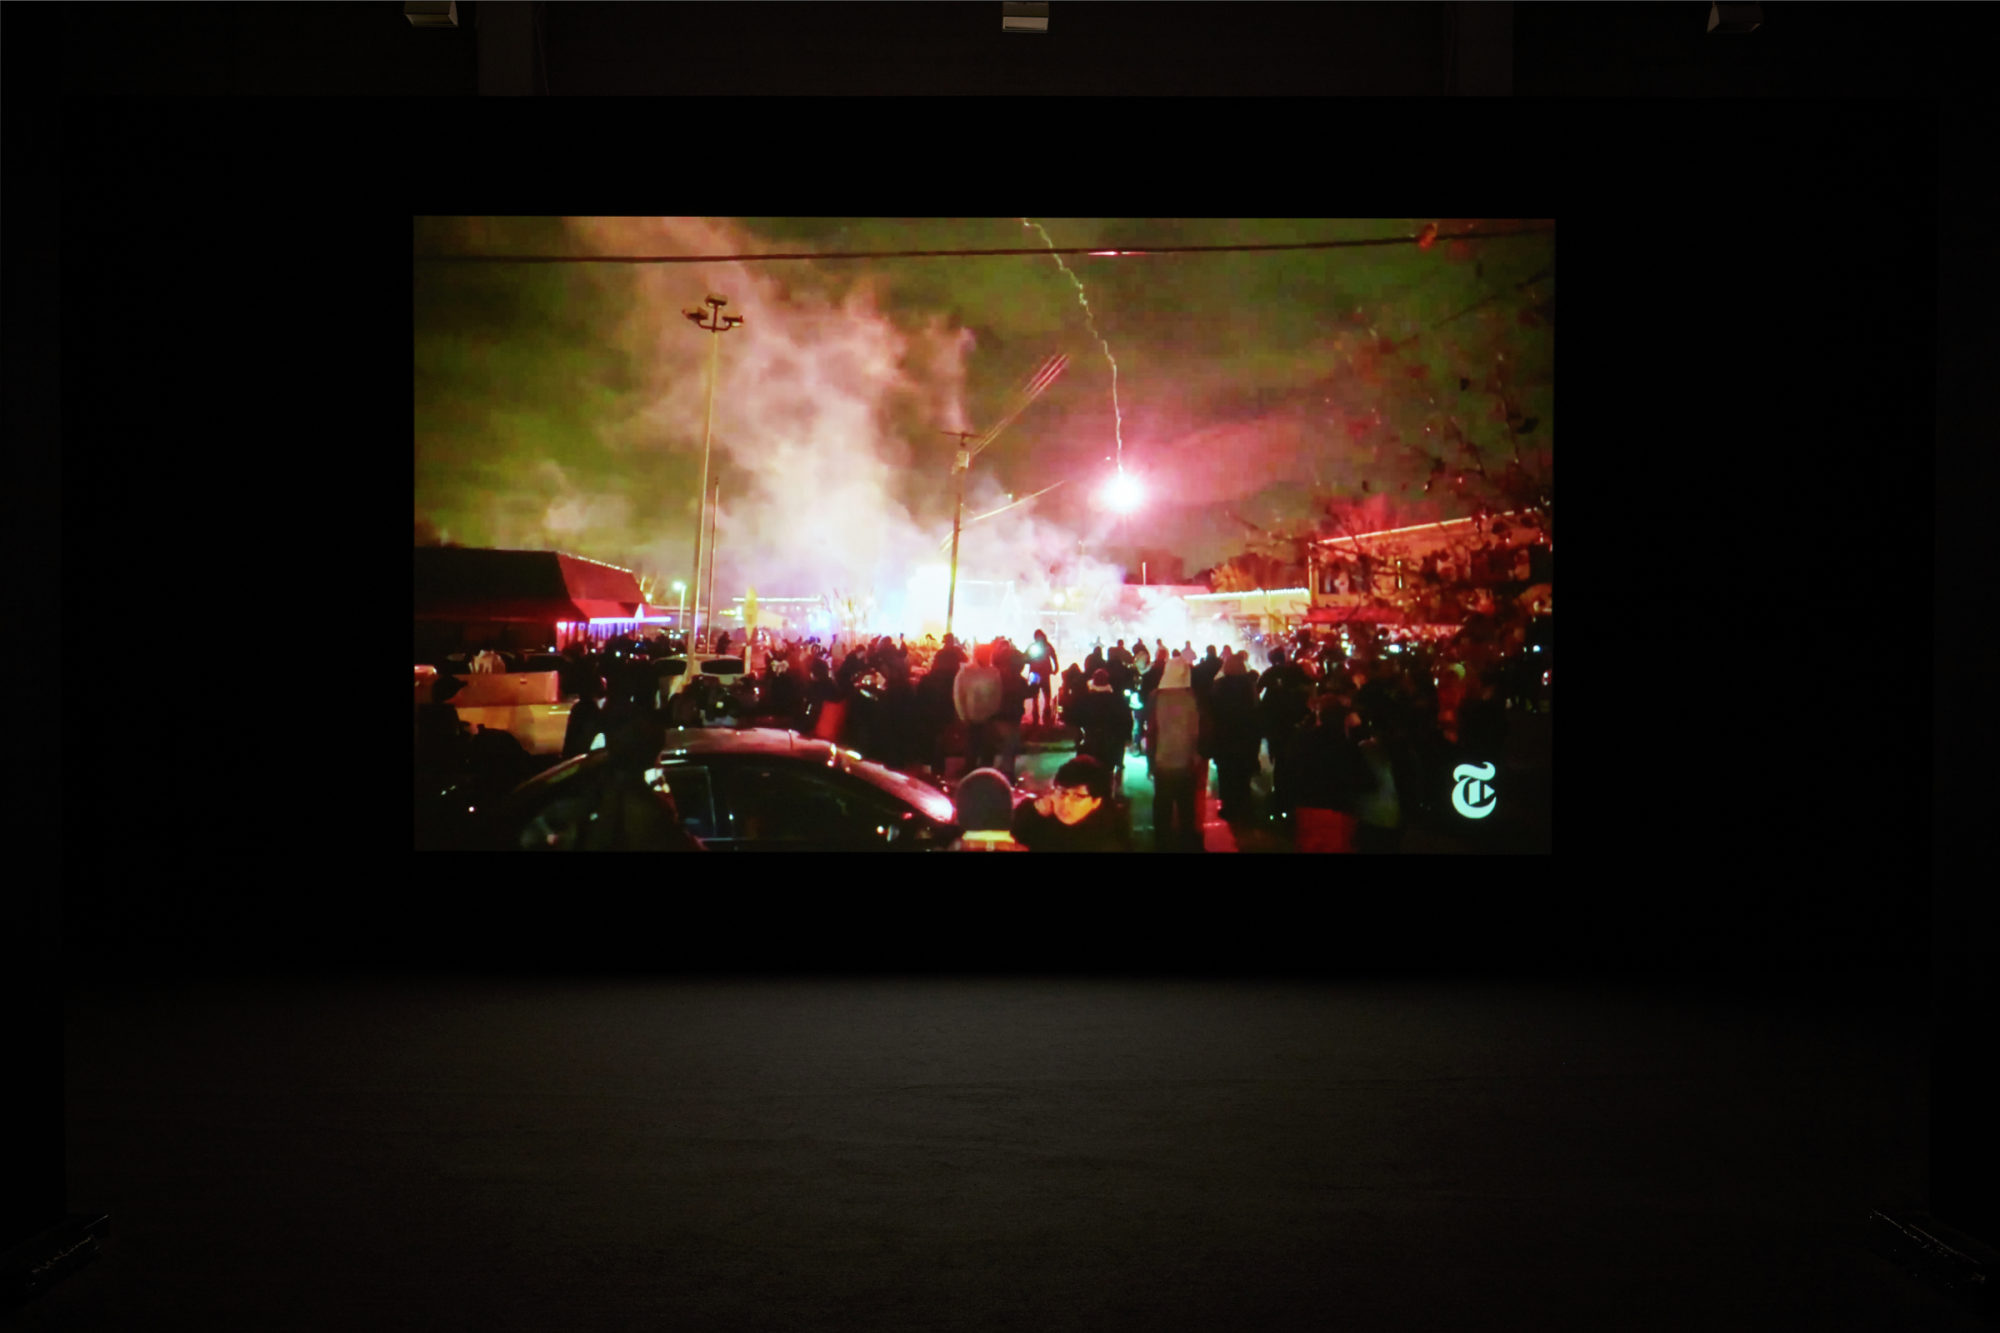 image of a video still depicting a large crowd surrounding a cloud of smoke and fireworks